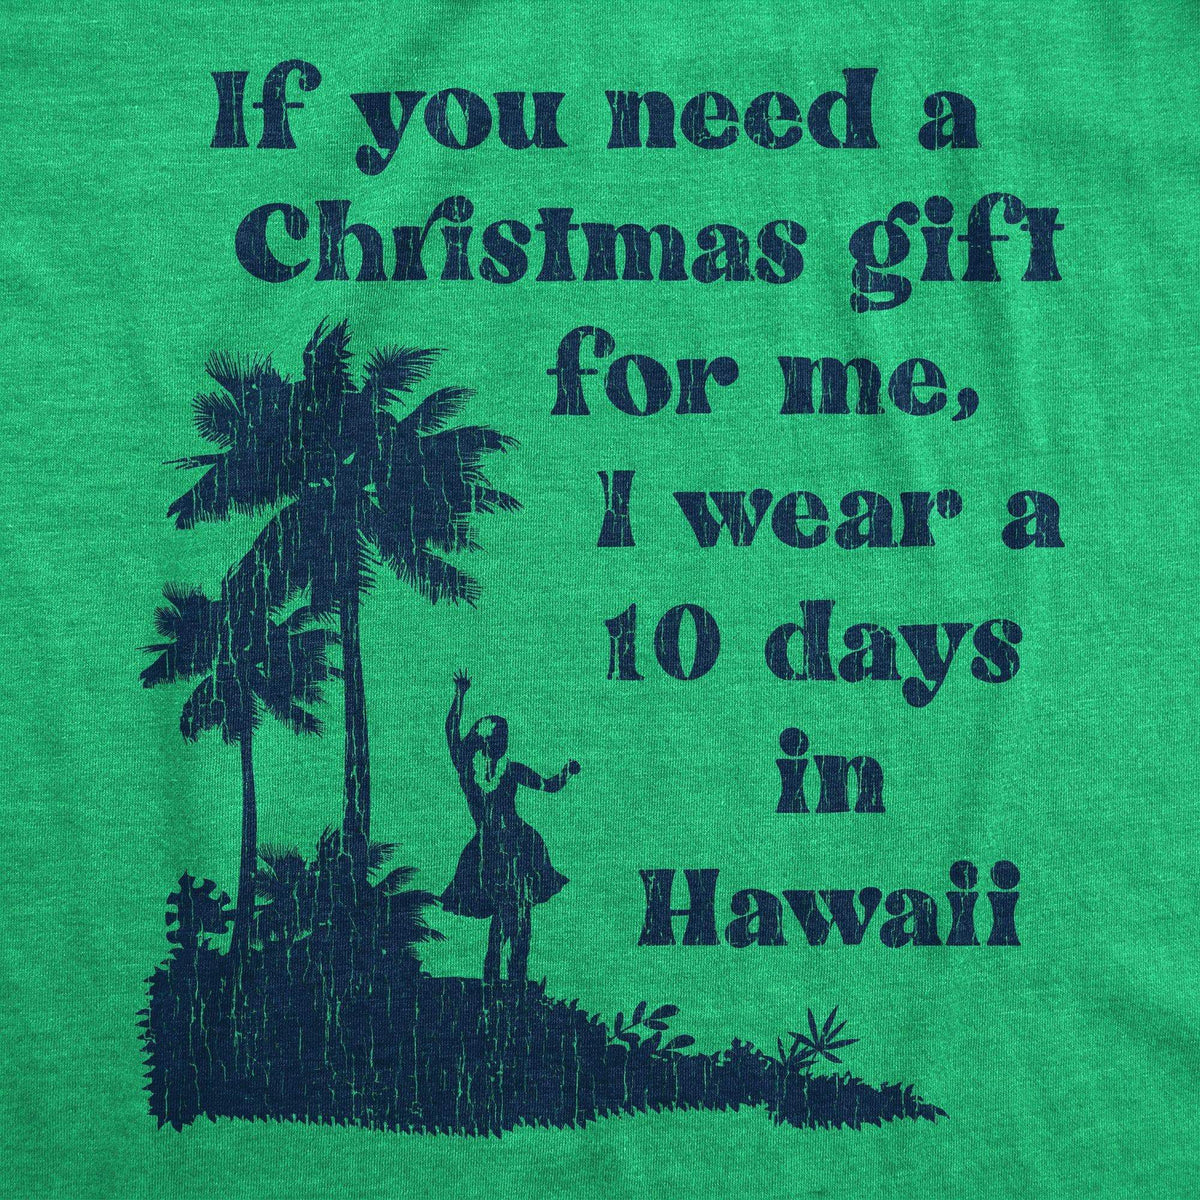 If You Need A Christmas Gift For Me I Wear A 10 Days In Hawaii Men&#39;s Tshirt - Crazy Dog T-Shirts